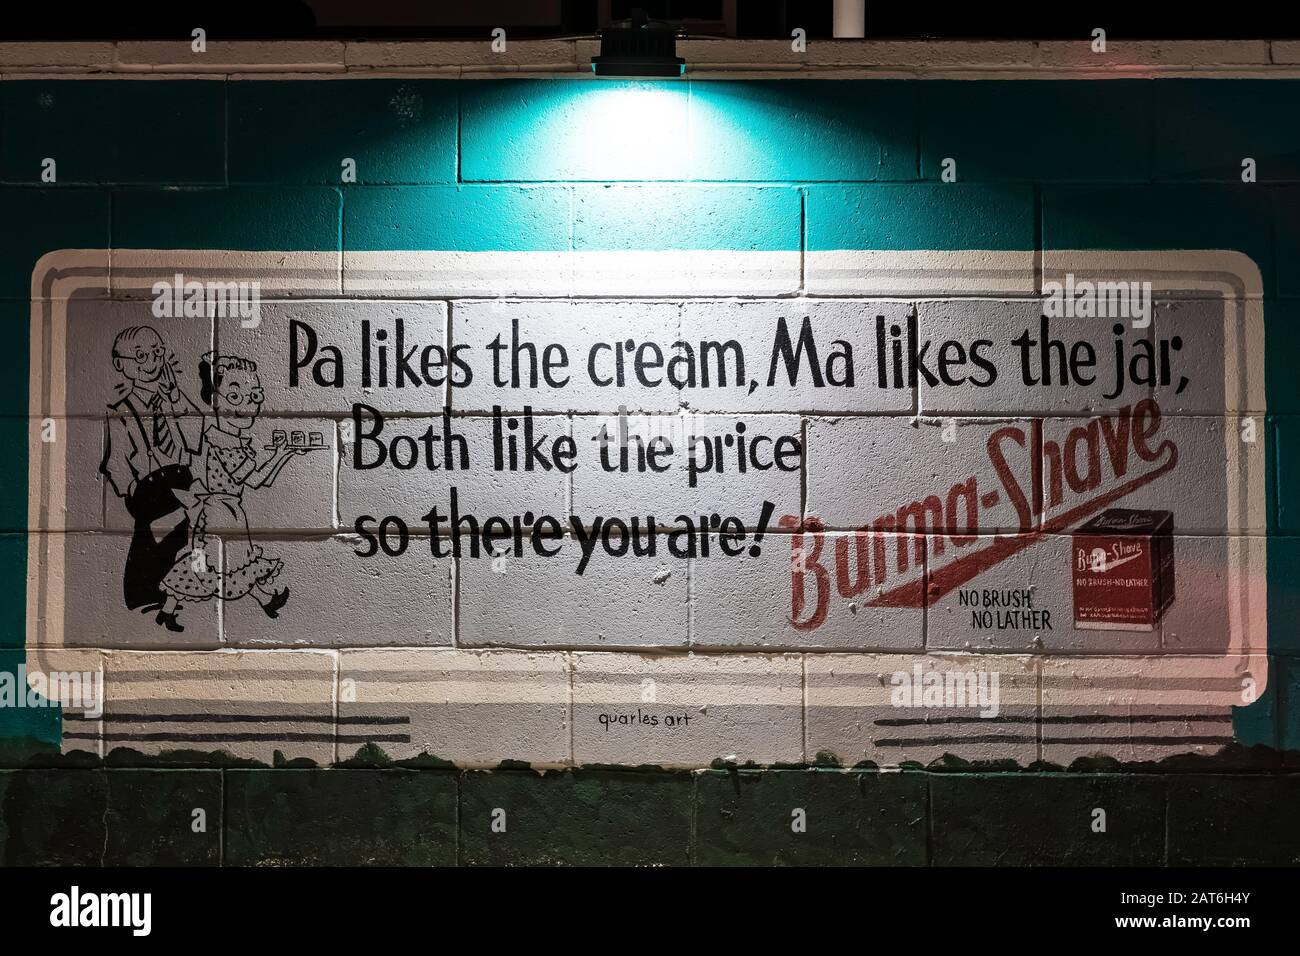 Reproduction of old Burma Shave billboard by artist Doug Quarles at Motel Safari along Historic Route 66 in Tucumcari, New Mexico, USA [No property or Stock Photo